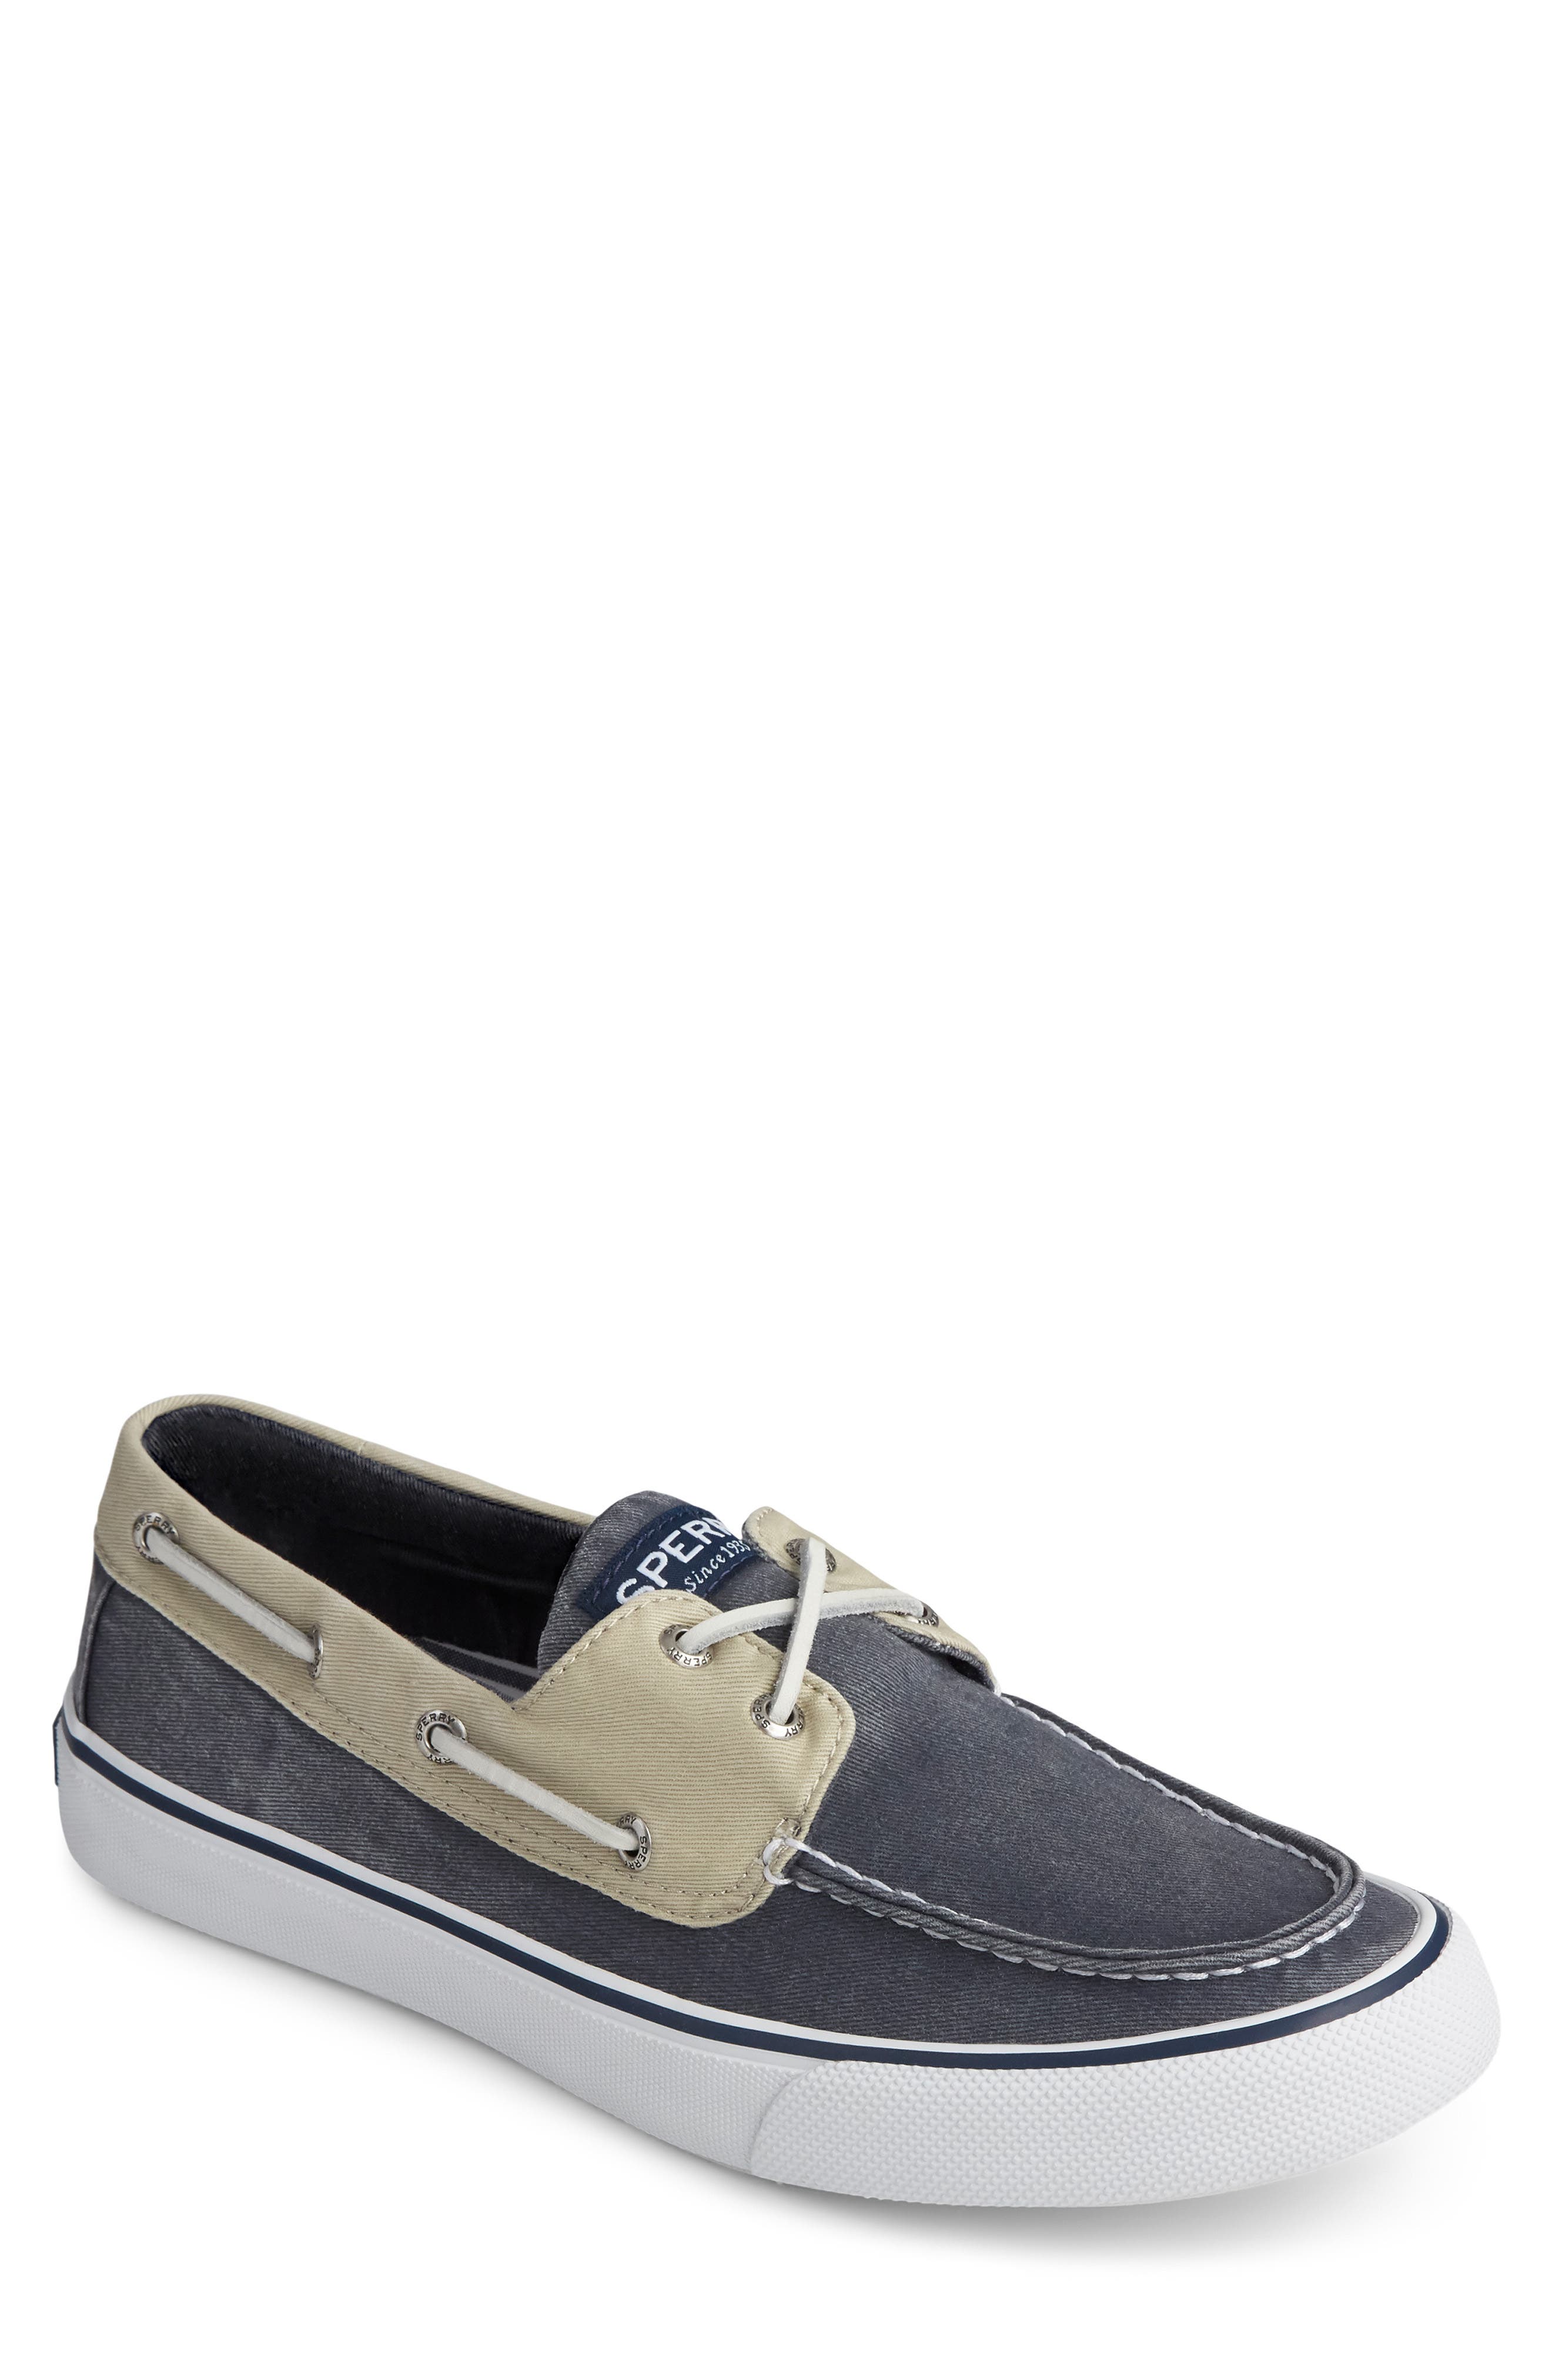 Sperry+Top-SiderSperry Top-Sider Bahama II Chaussure Bateau Homme 